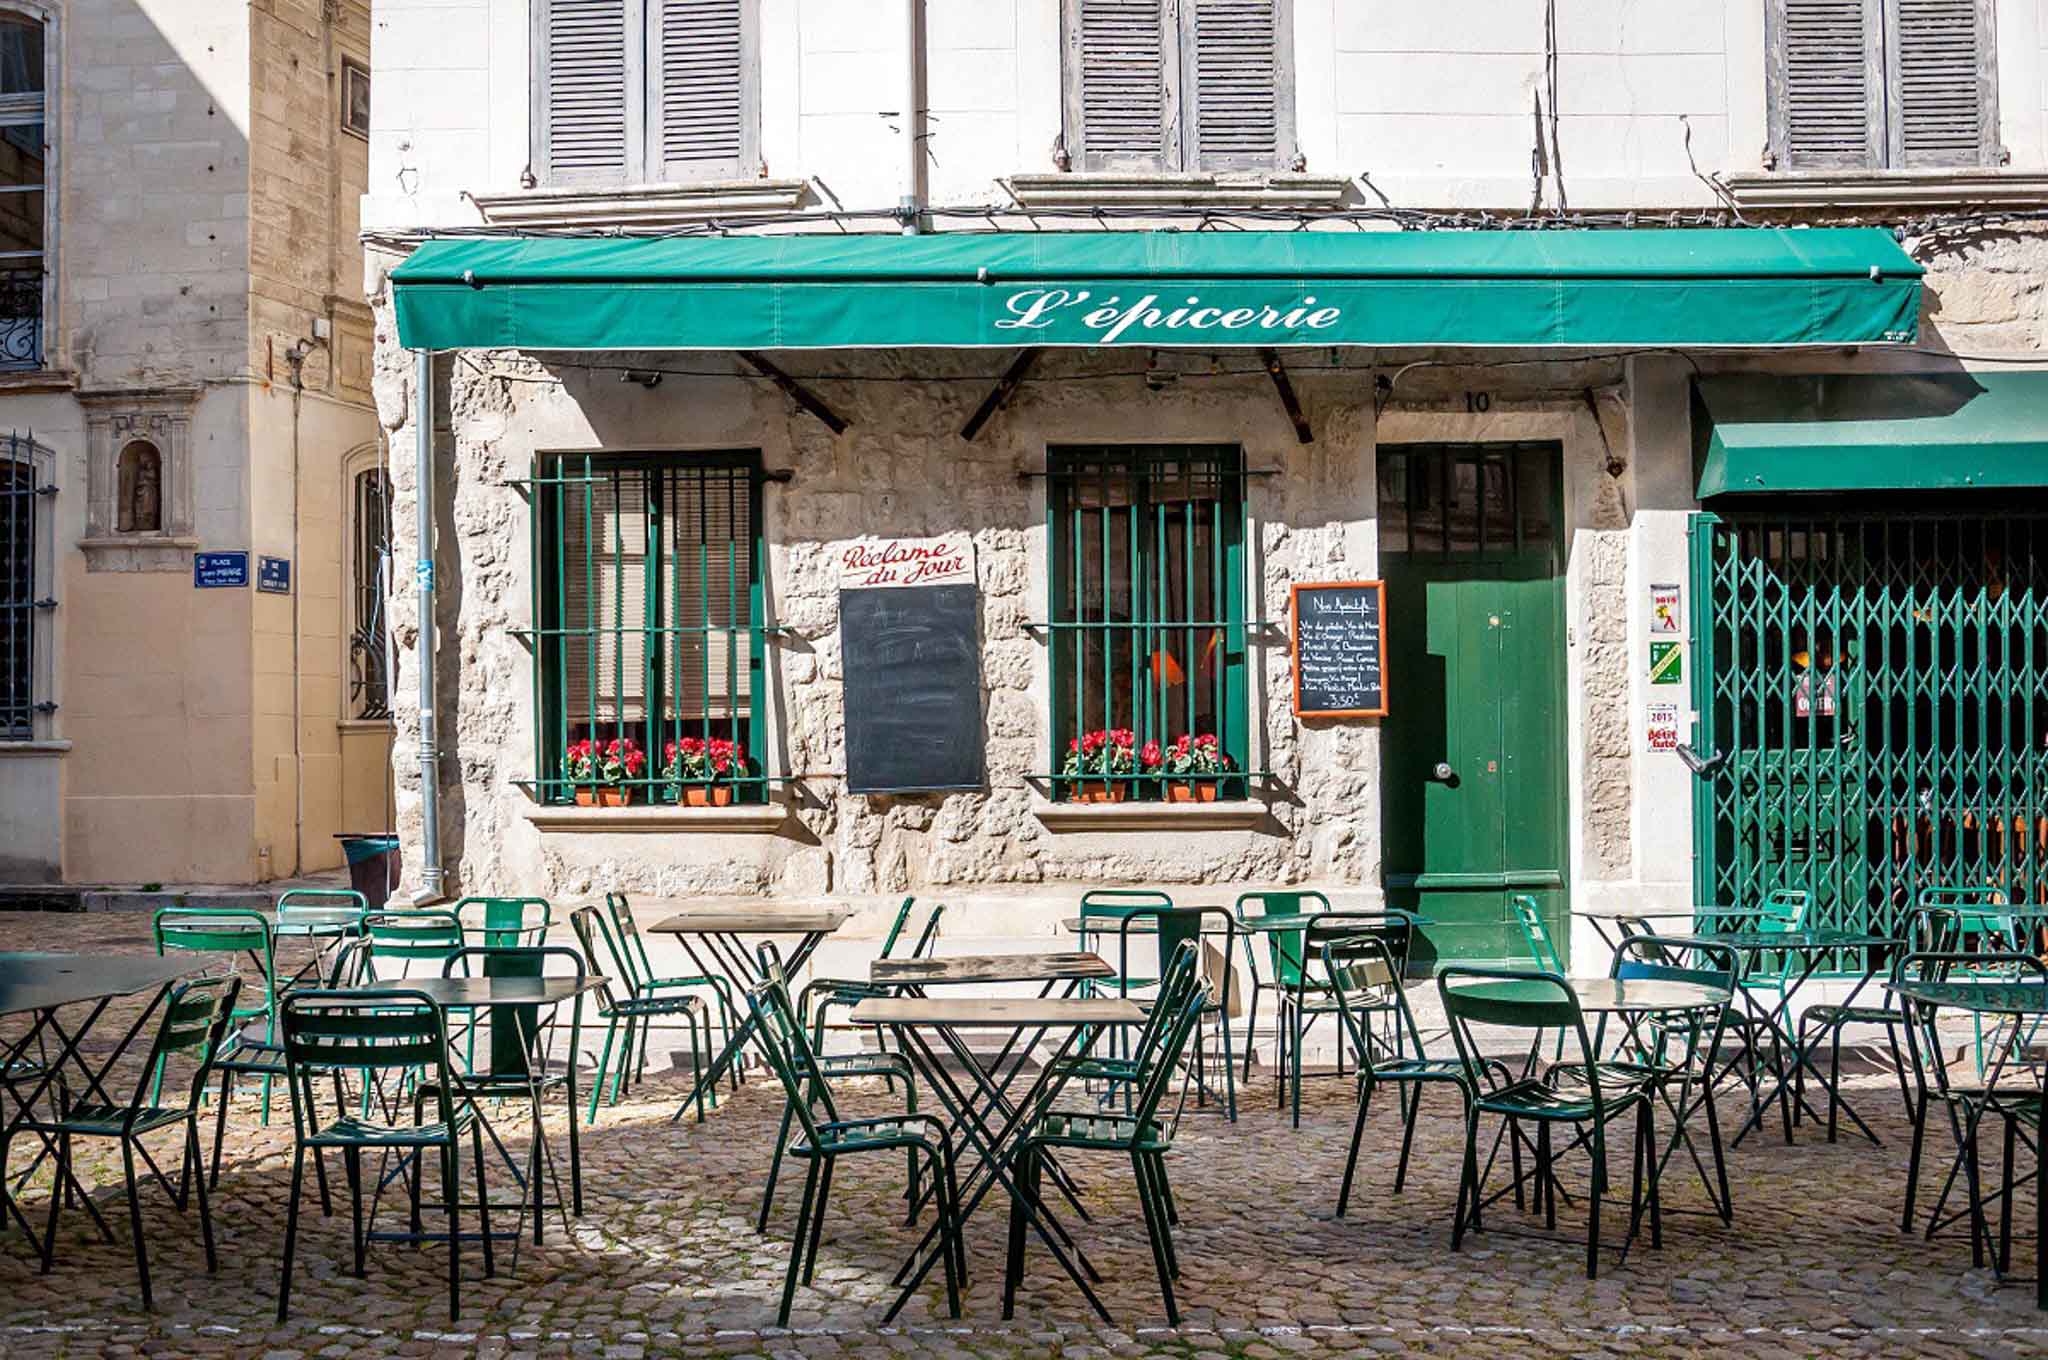 Outdoor cafe with green chairs and awning.